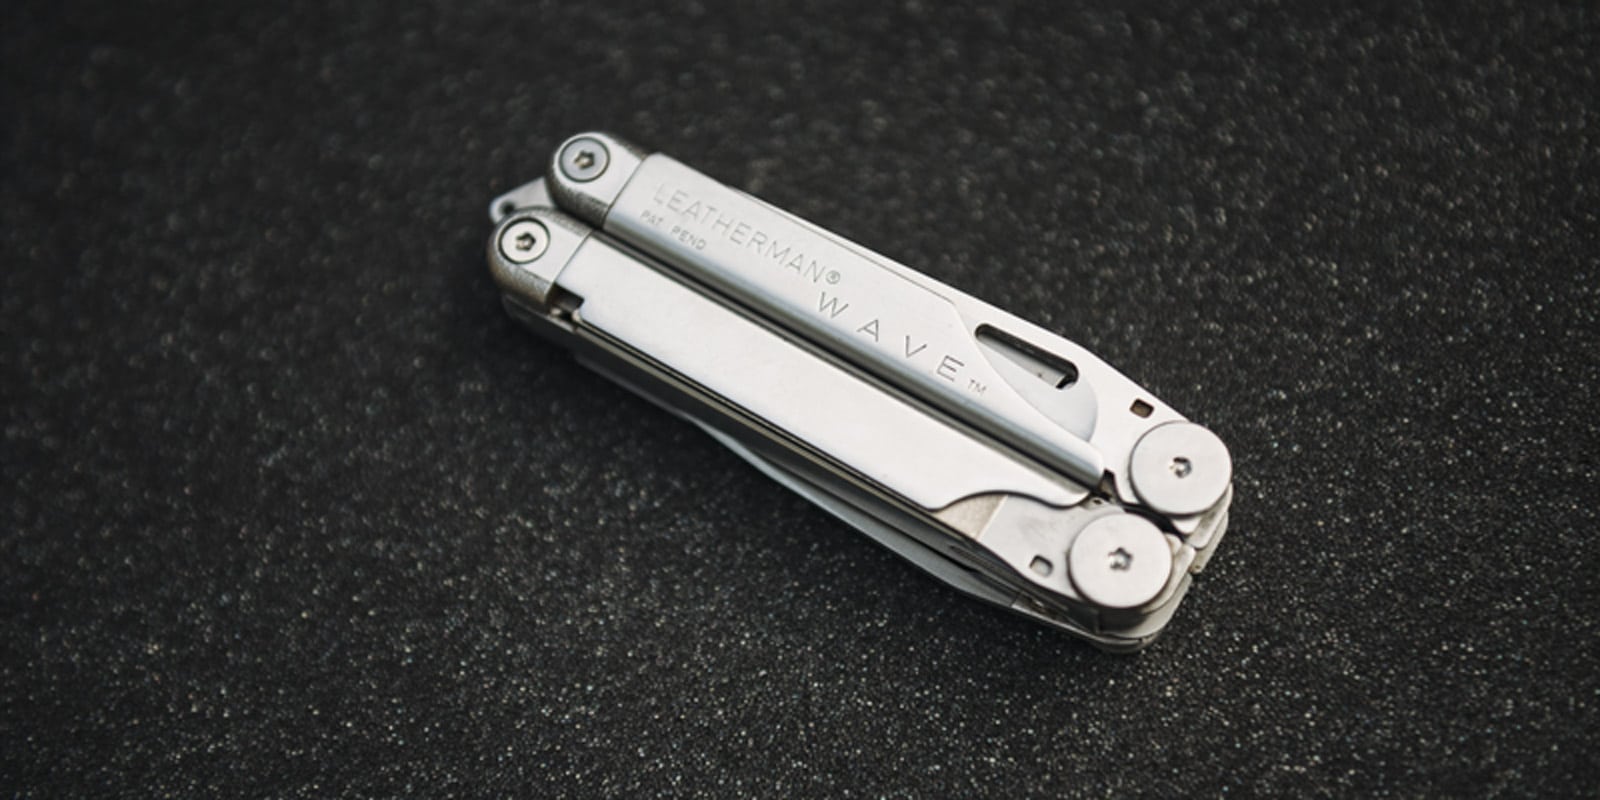 Review: Leatherman Wave Multi-Tool